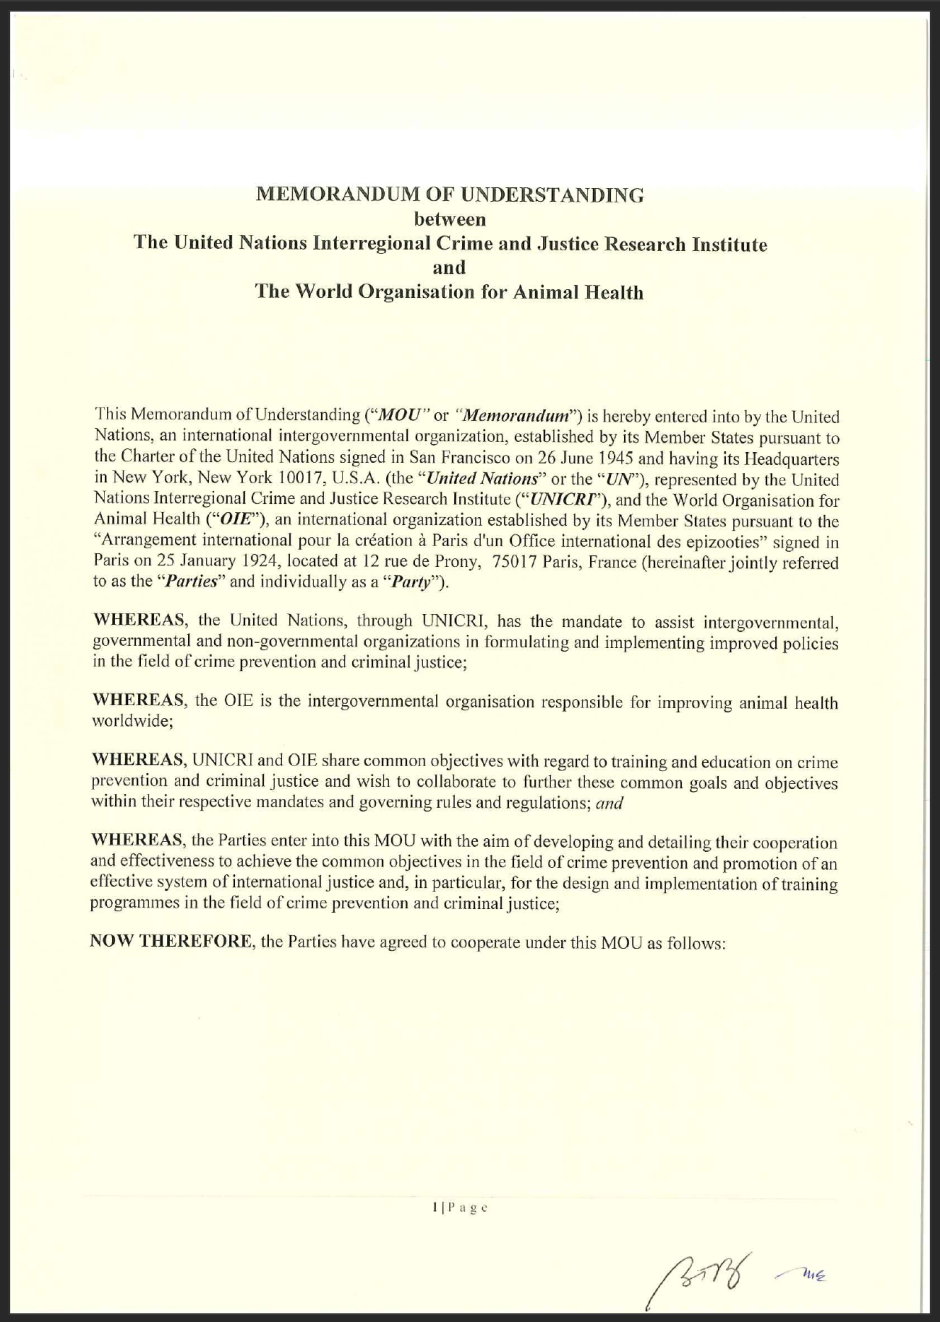 Memorandum of Understanding between The United Nations Interregional Crime and Justice Research Institute (UNICRI) and the World Organisation for Animal Health (OIE)